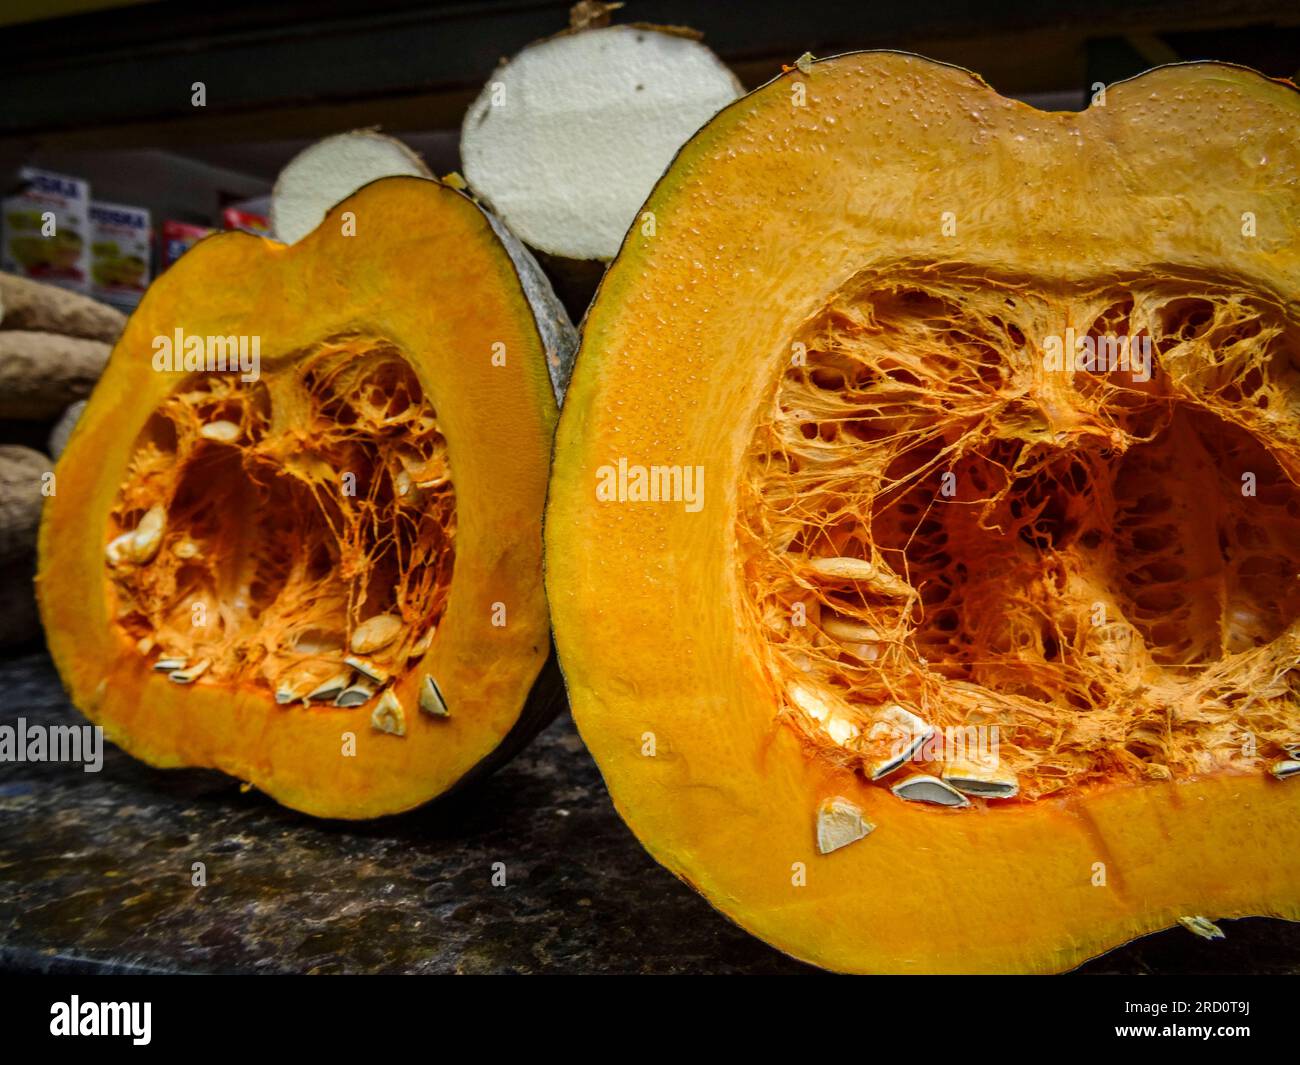 Food close up of pumpkin sliced for sale showing seeds Stock Photo